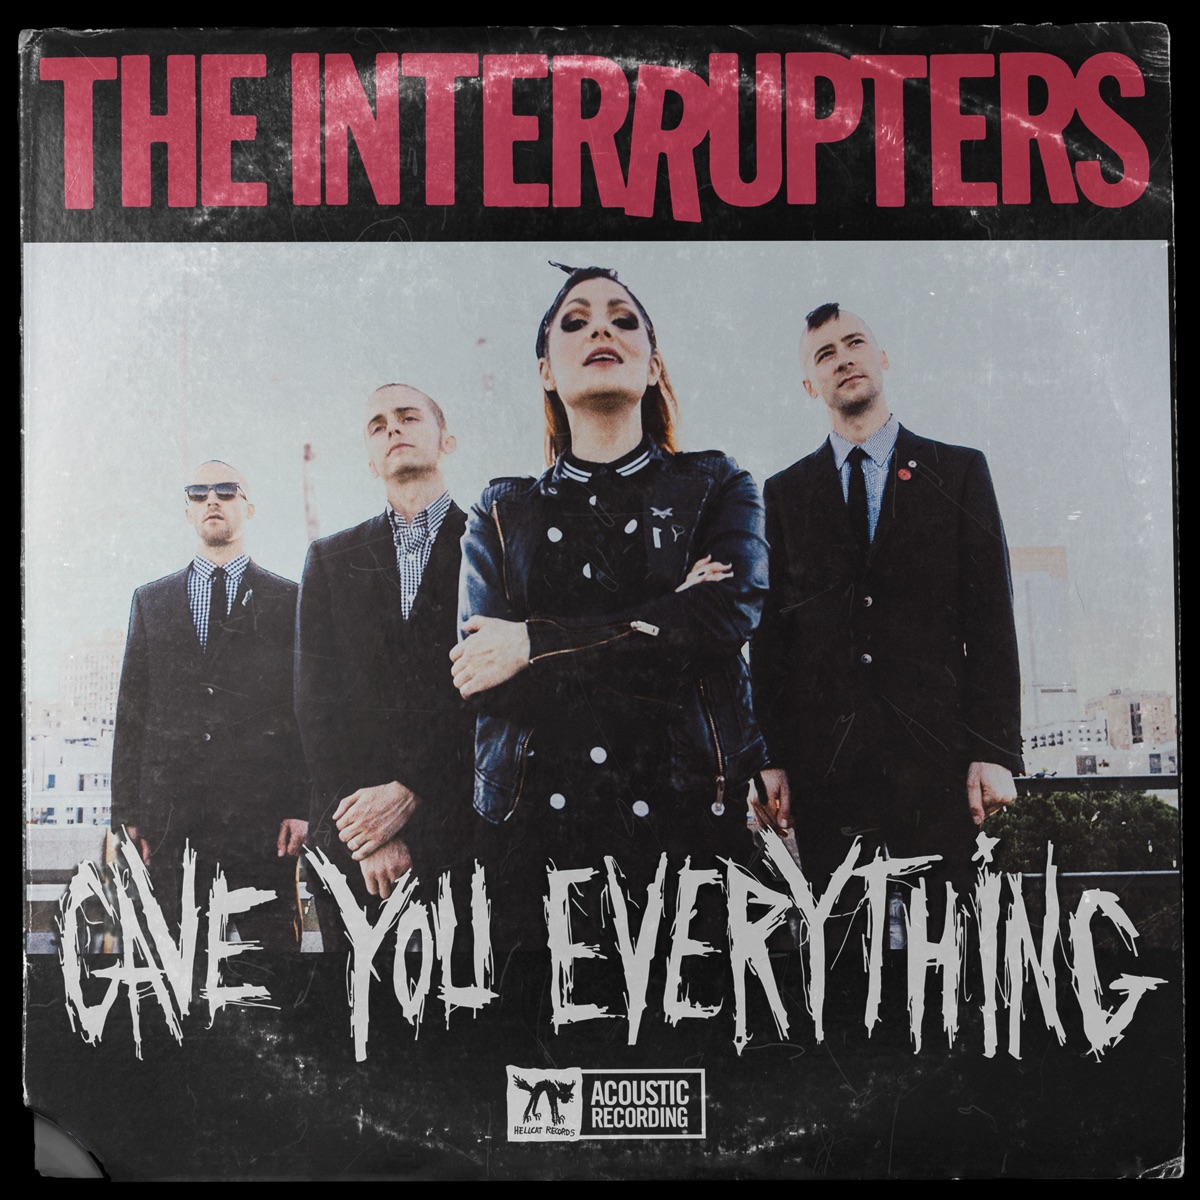 The Interrupters (Deluxe Edition) - Album by The Interrupters 